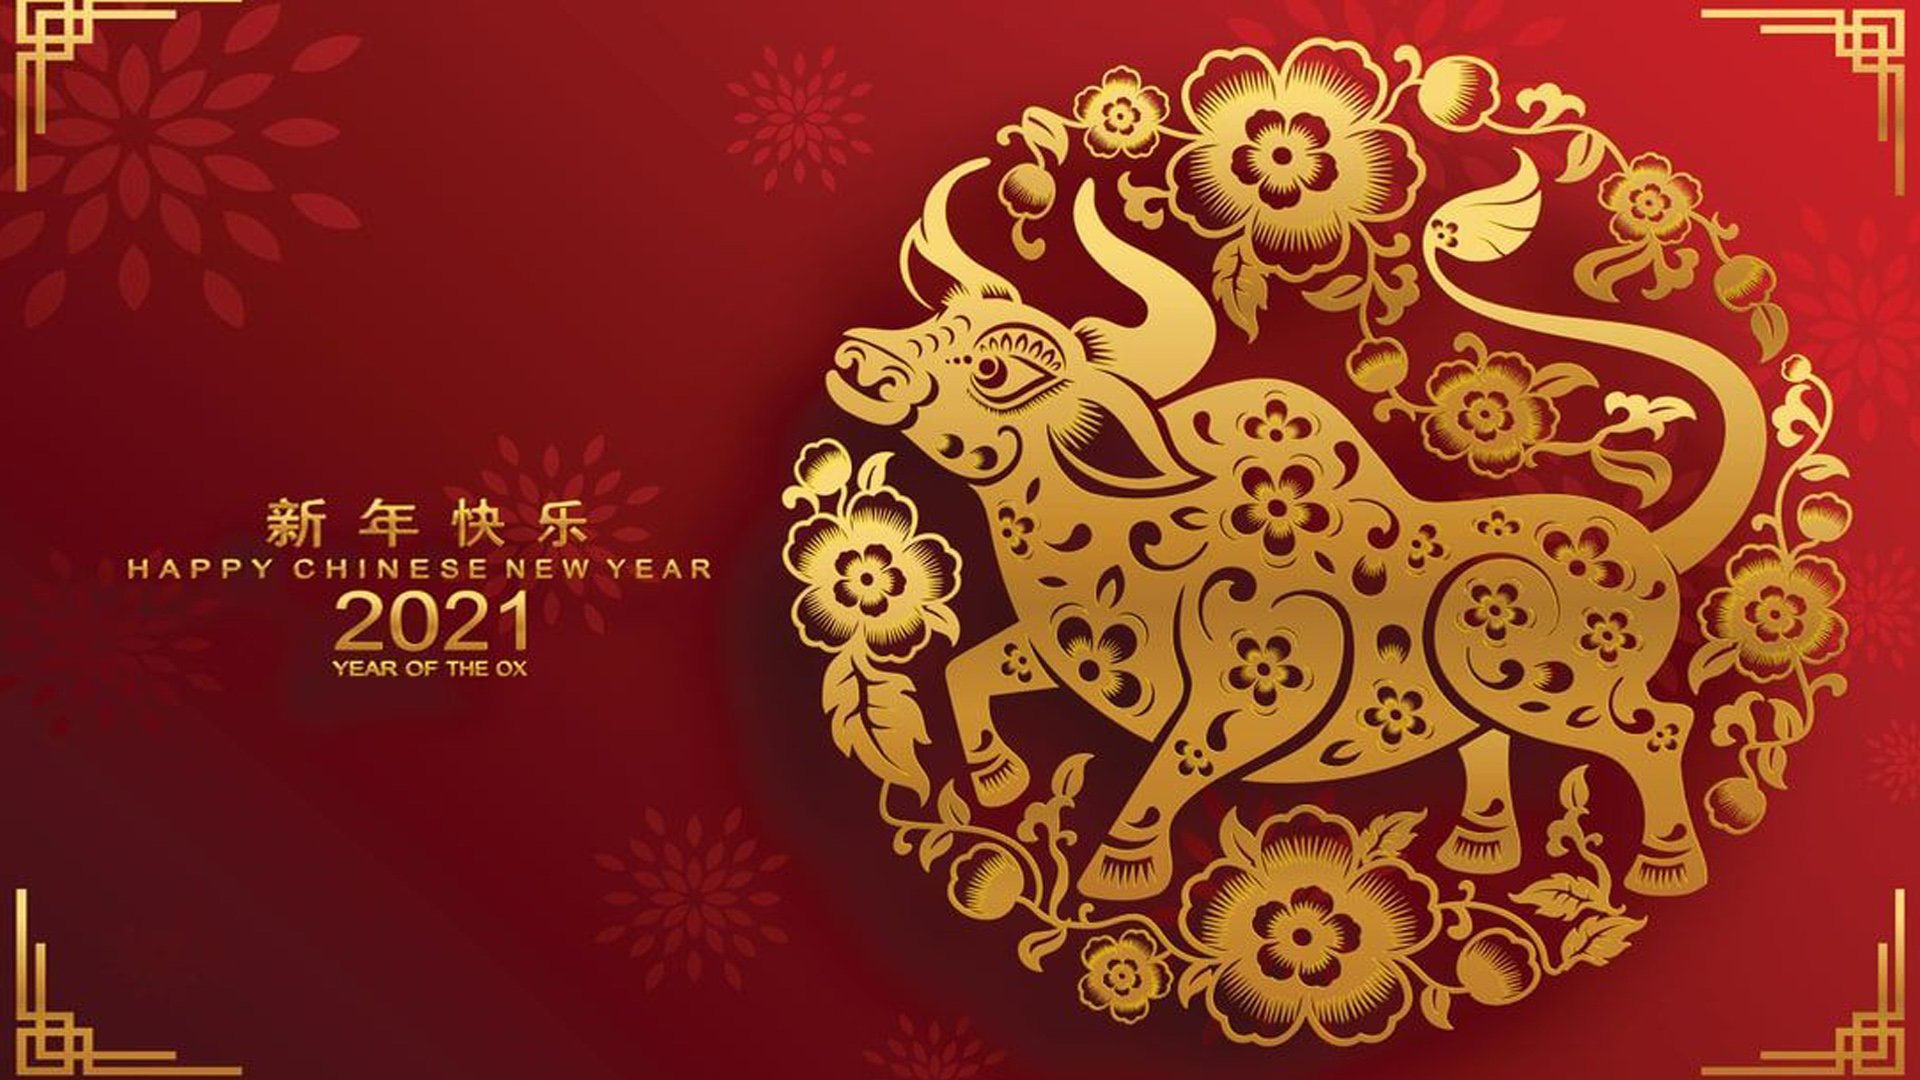 Happy Chinese Lunar New Year Day 2021 of the Ox Wallpaper. Wallpaper Download. High Resolution Wallpaper